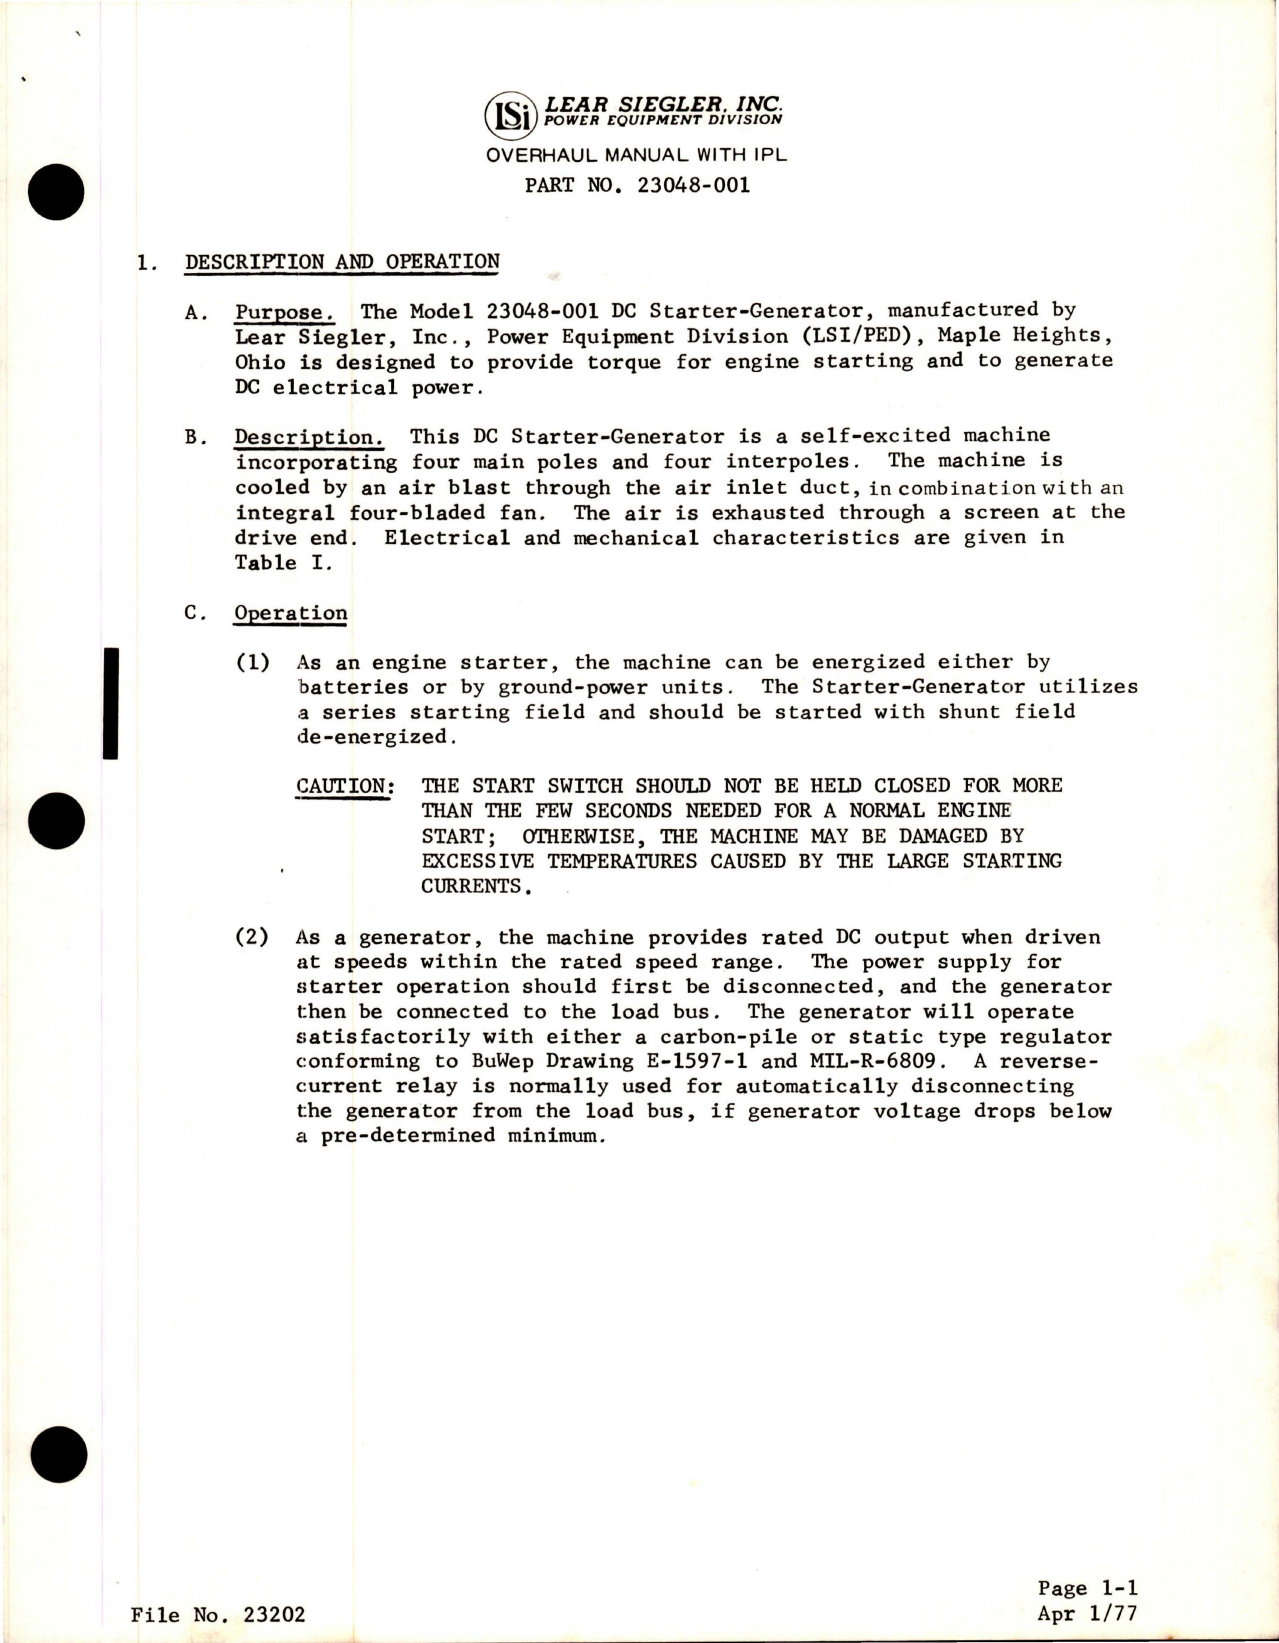 Sample page 9 from AirCorps Library document: Overhaul Manual with Parts List for DC Starter Generator - Model 23048 Series